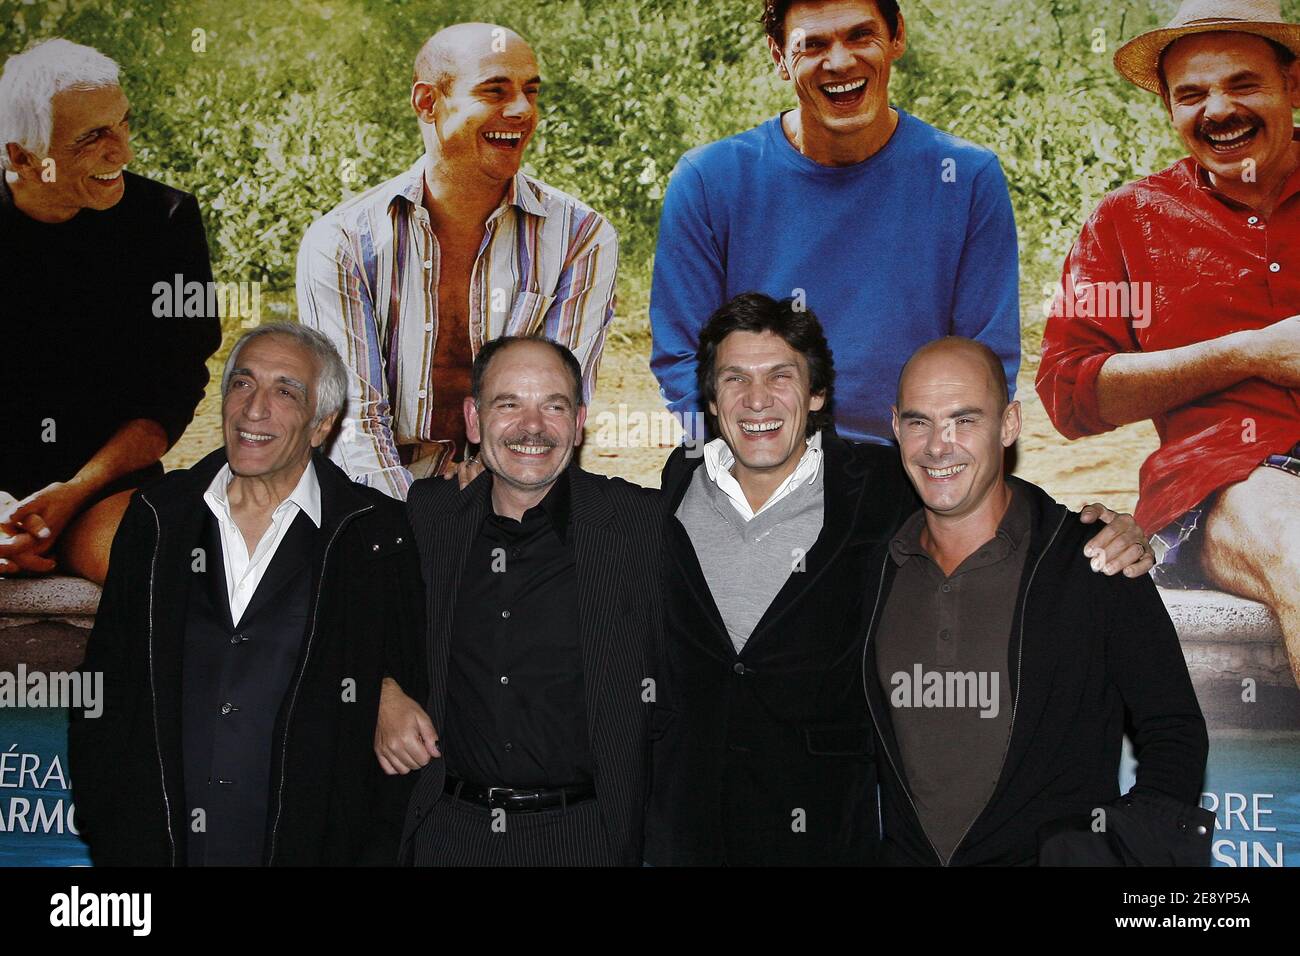 Gerard Darmon, Jean-Pierre Darroussin, Marc Lavoine, and Bernard Campan attend the premiere of Le Coeur des Hommes 2, held at the Gaumont Marignan theater in Paris, France, on October 15, 2007. Photo by Thierry Orban/ABACAPRESS.COM Stock Photo